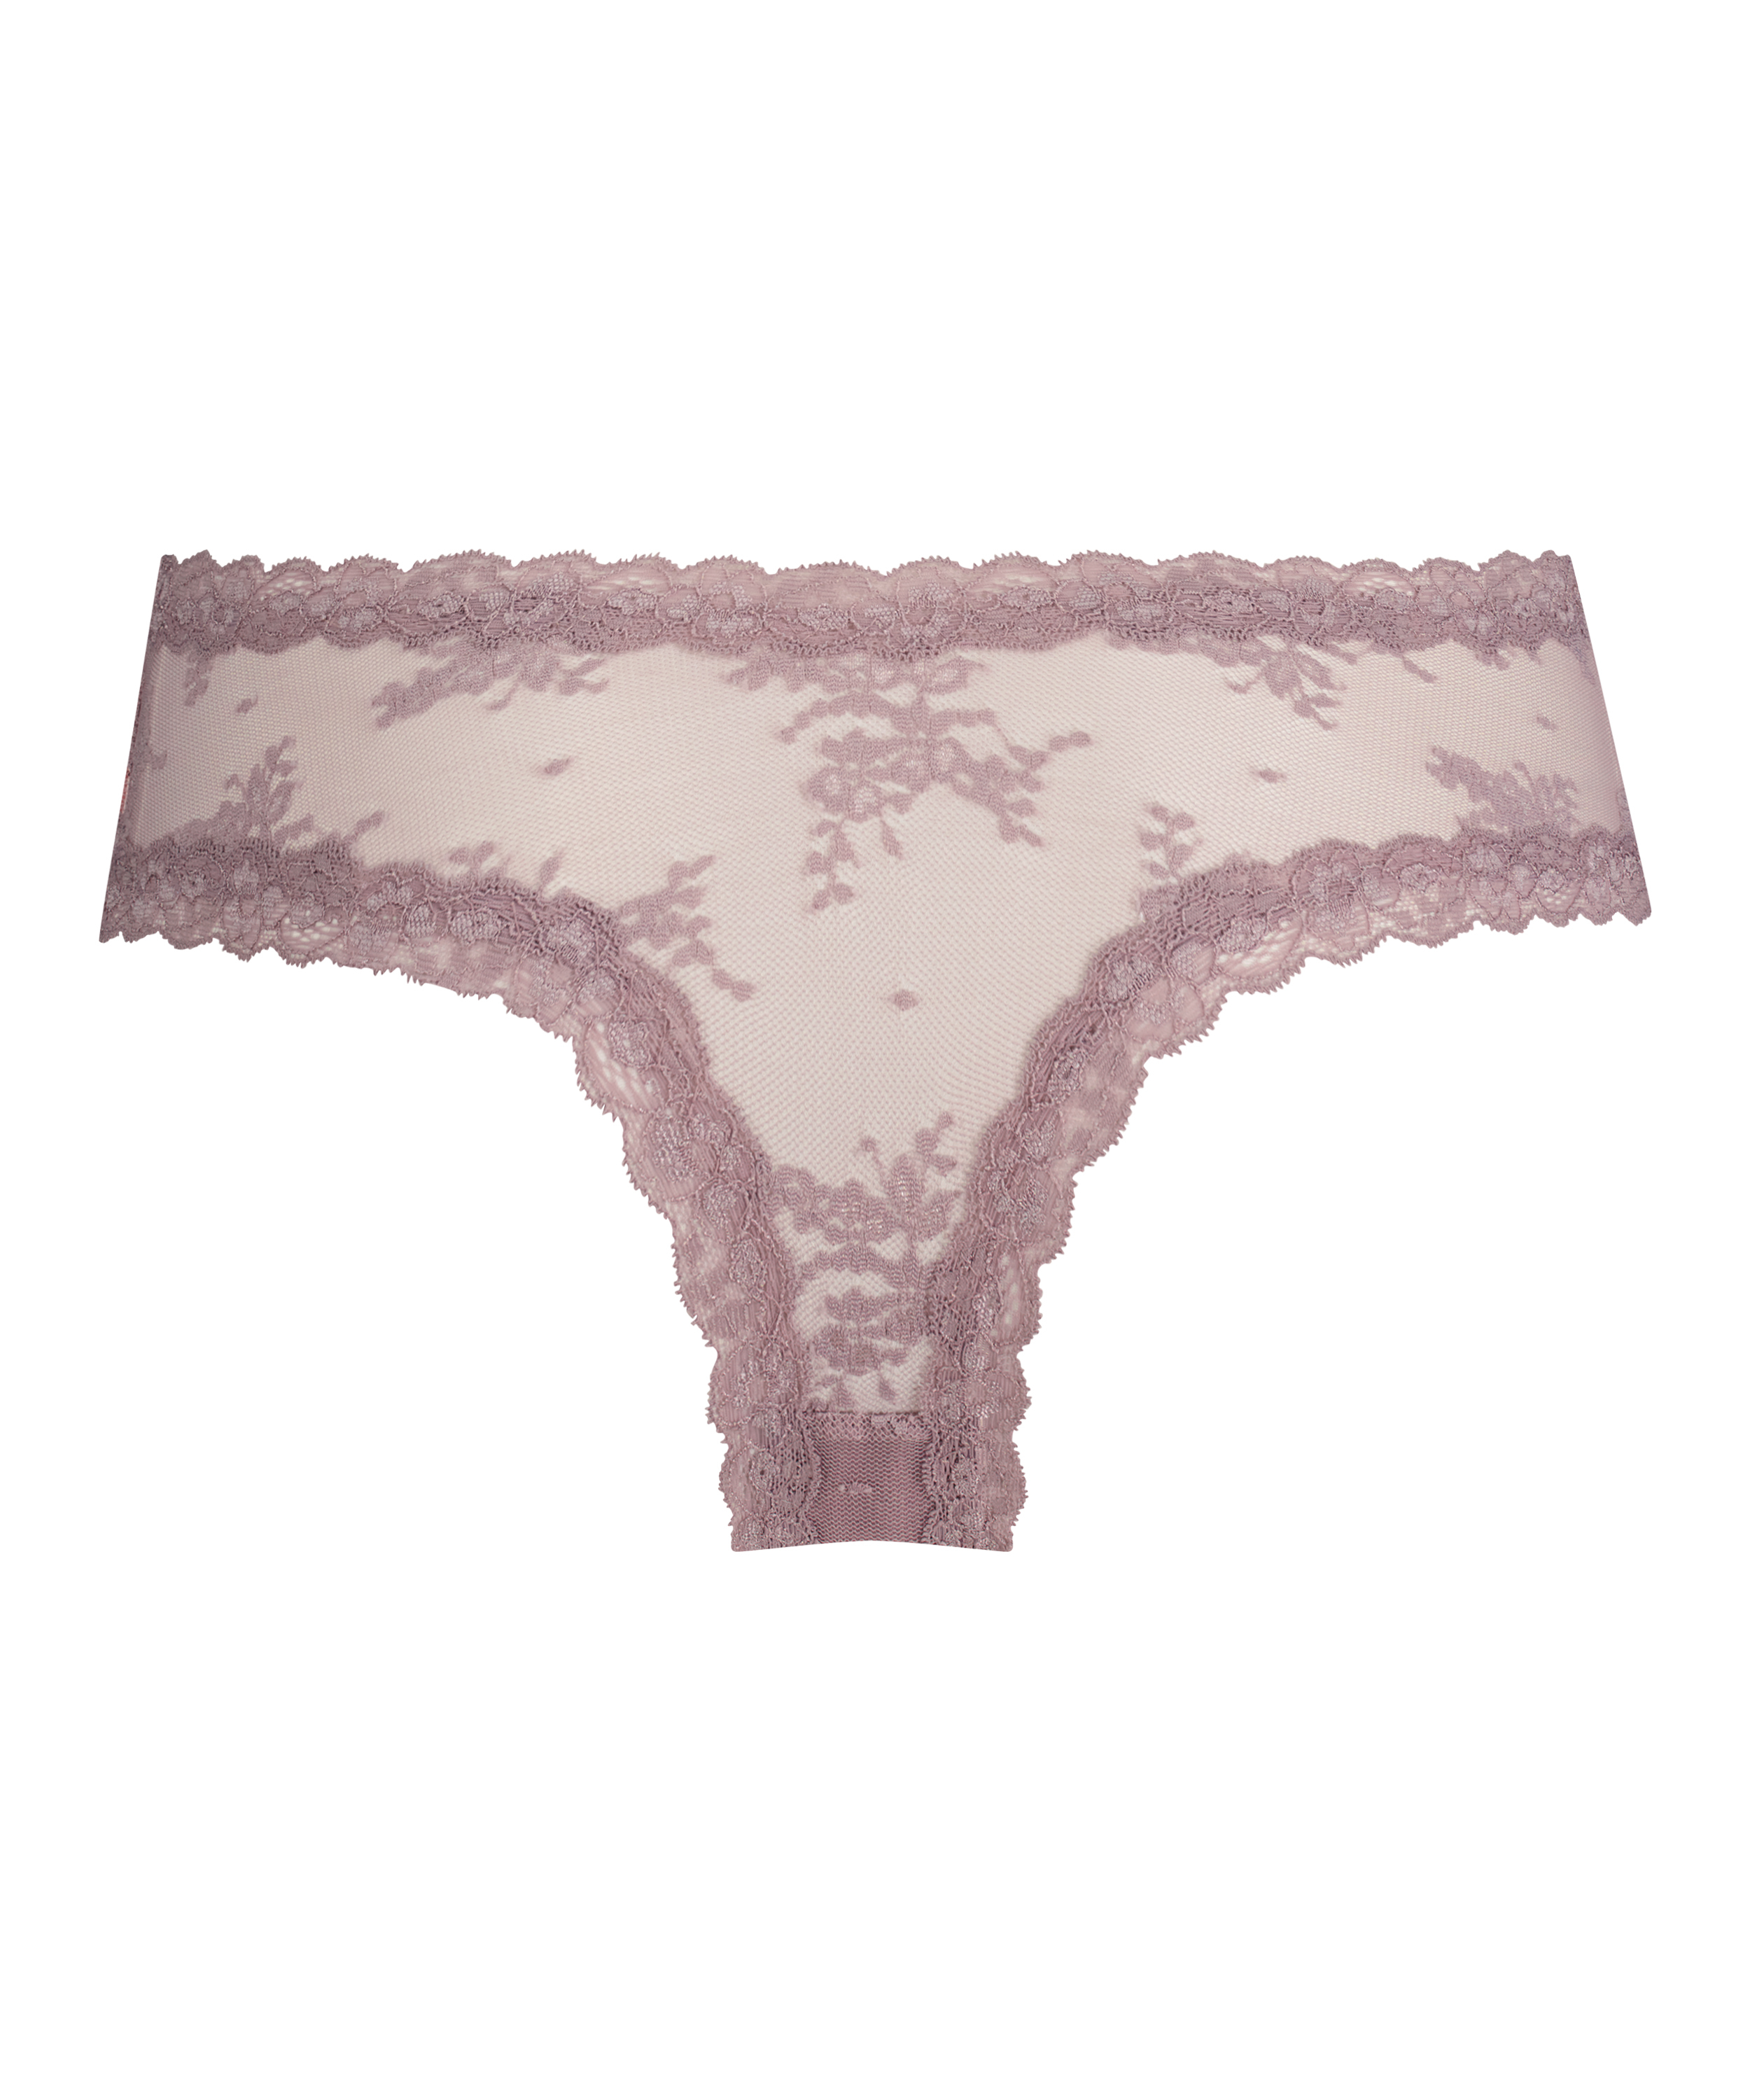 Floral Mesh V-shaped Brazilian Knickers, Fioletowy, main